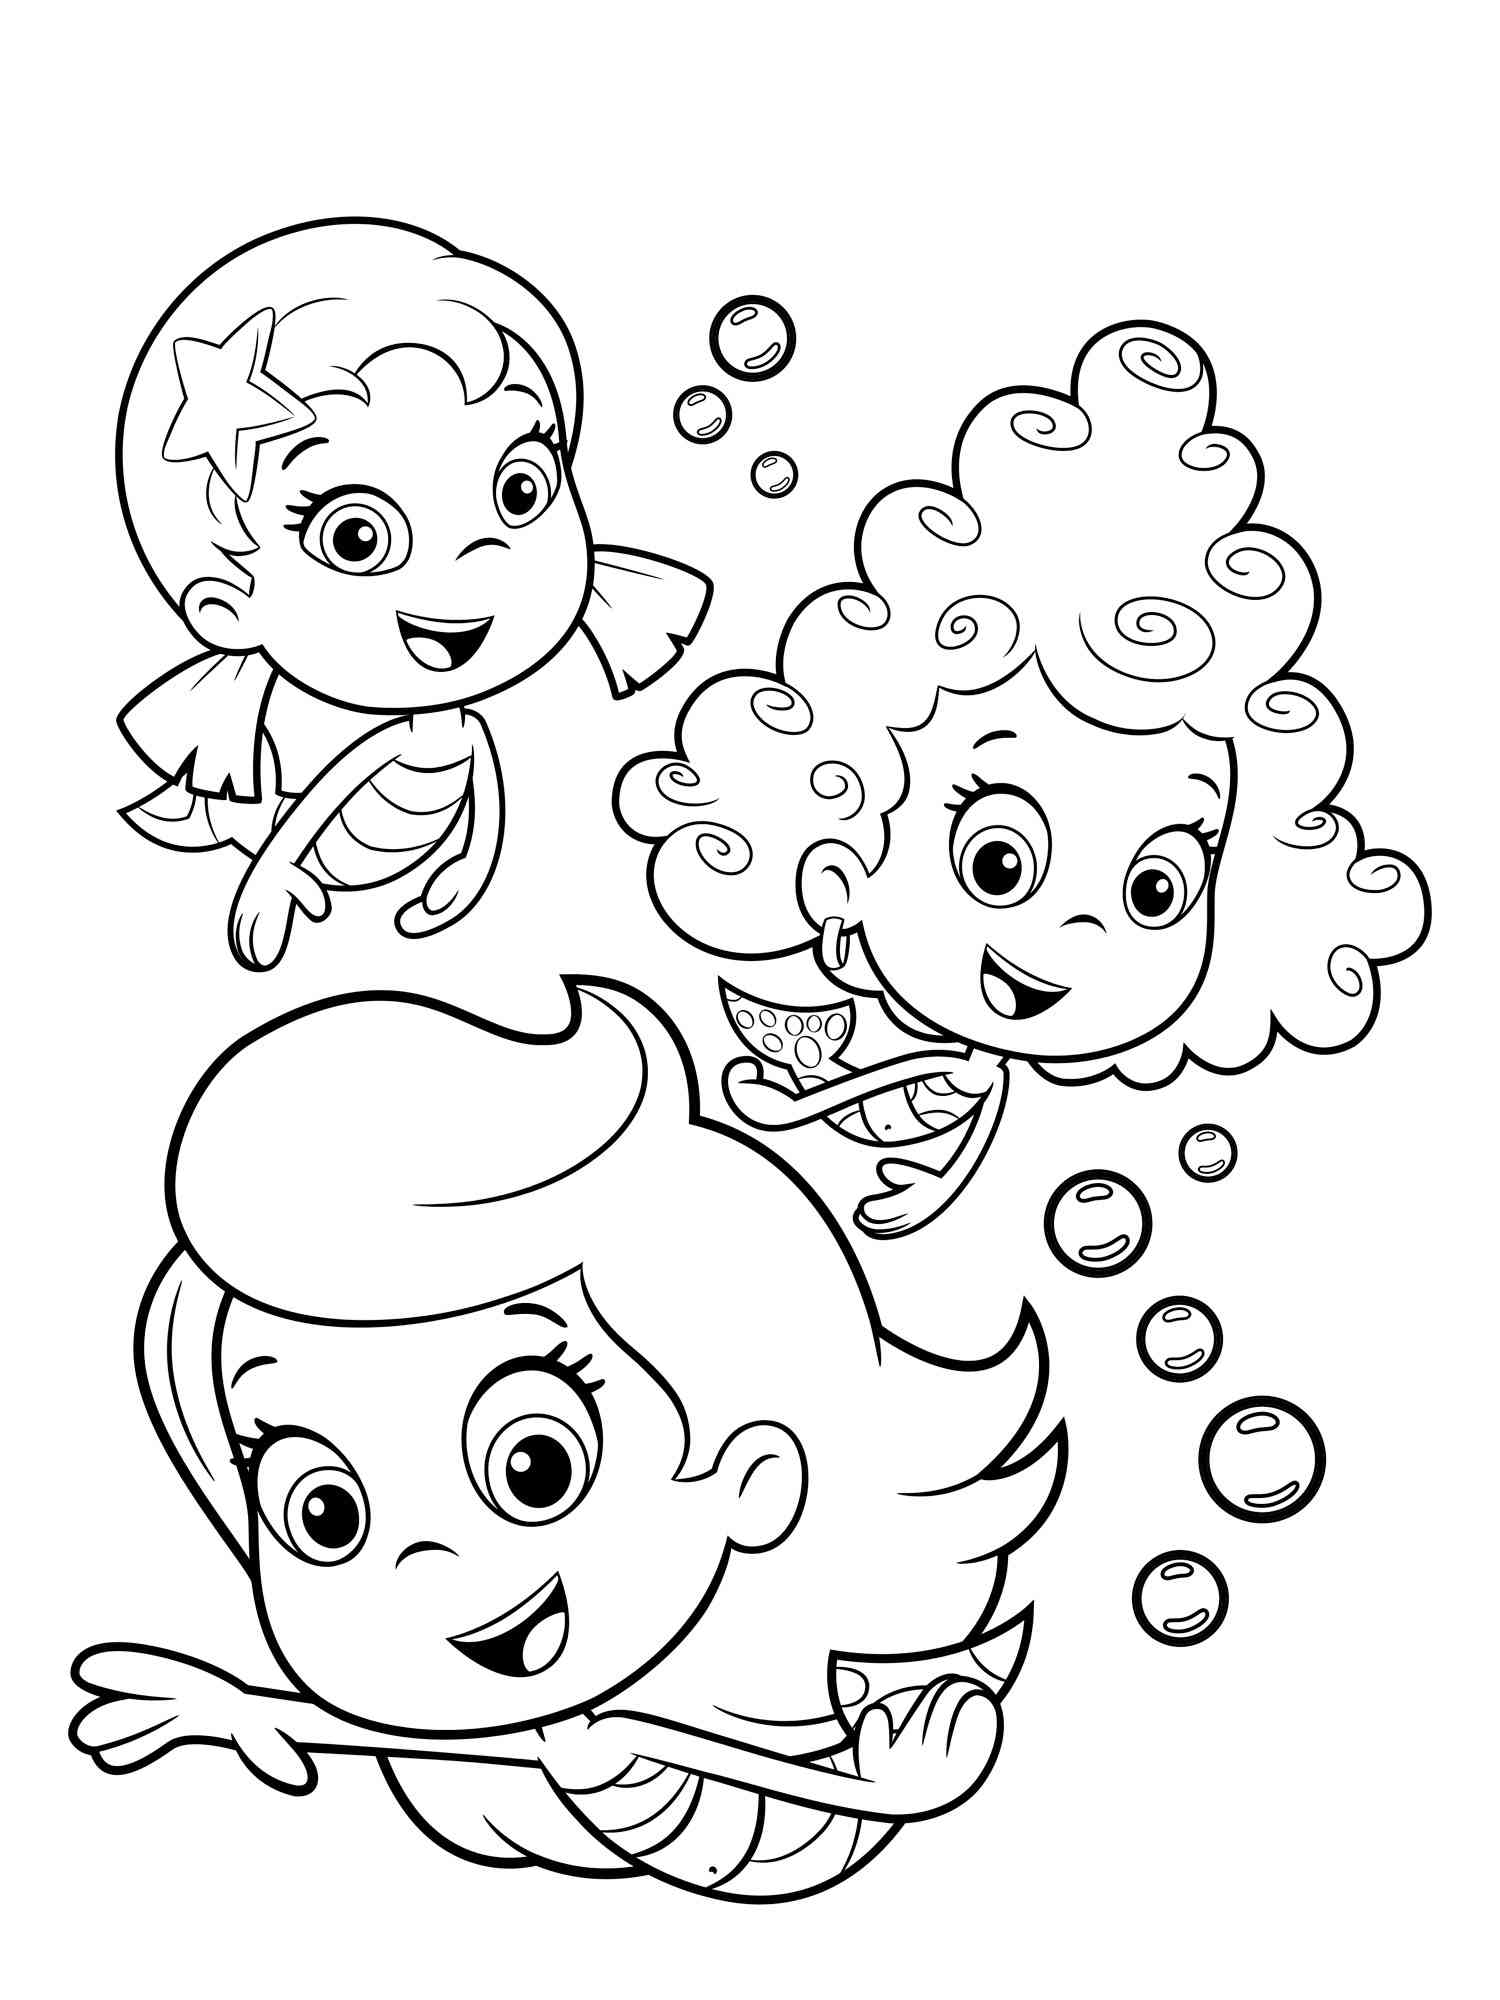 Bubble Guppies 38 coloring page